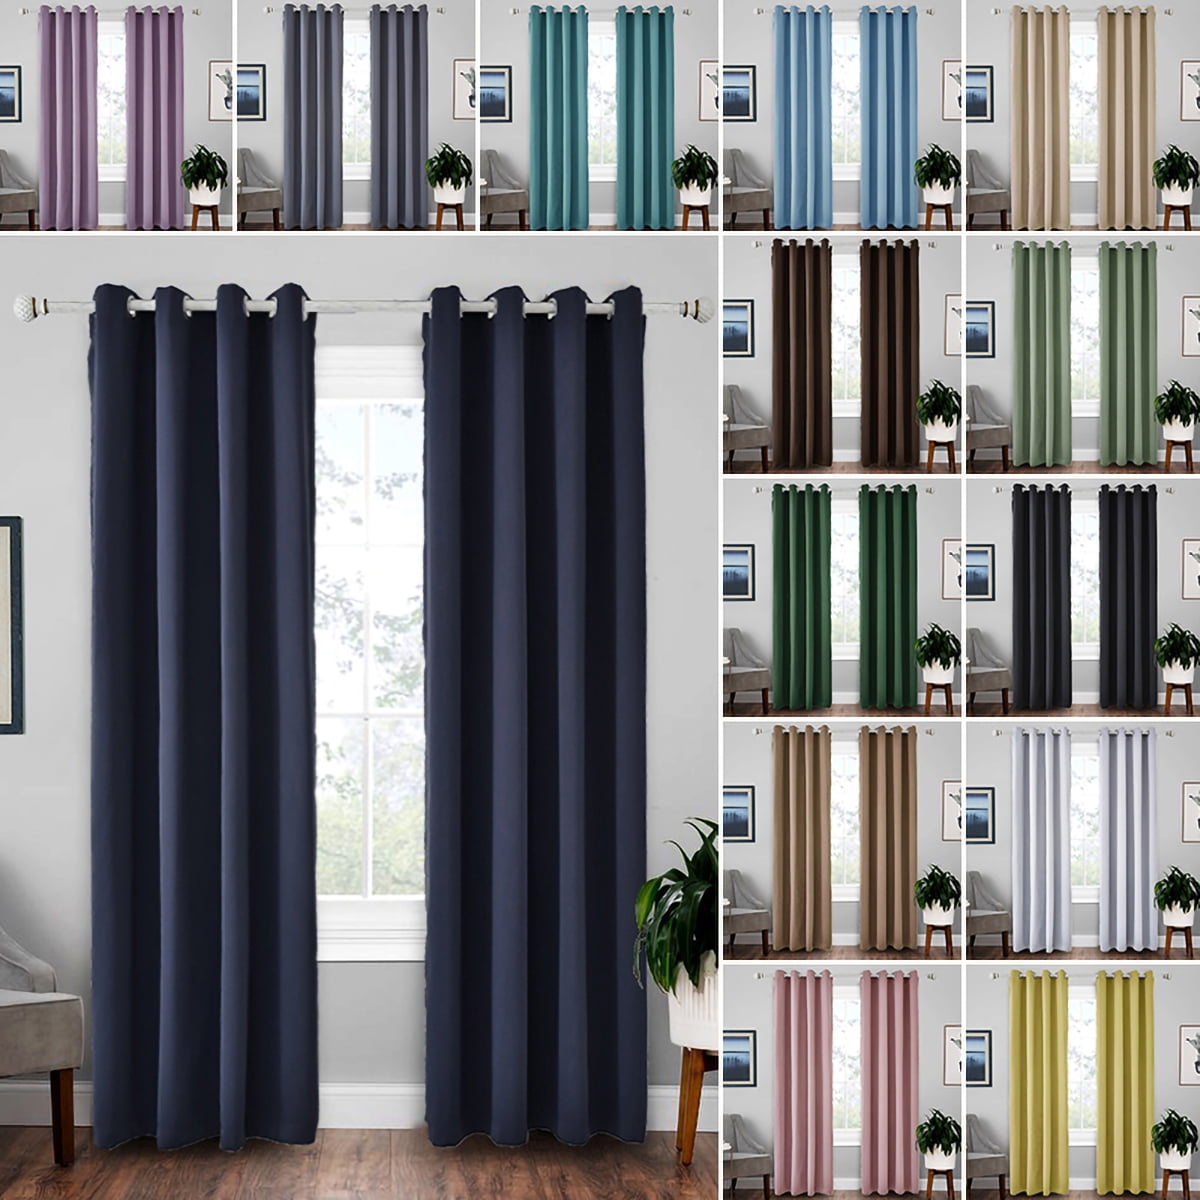 Details about   Iron Man Living Room Blackout Curtains Panels Bedroom Thermal Window Drapes 2PCS 